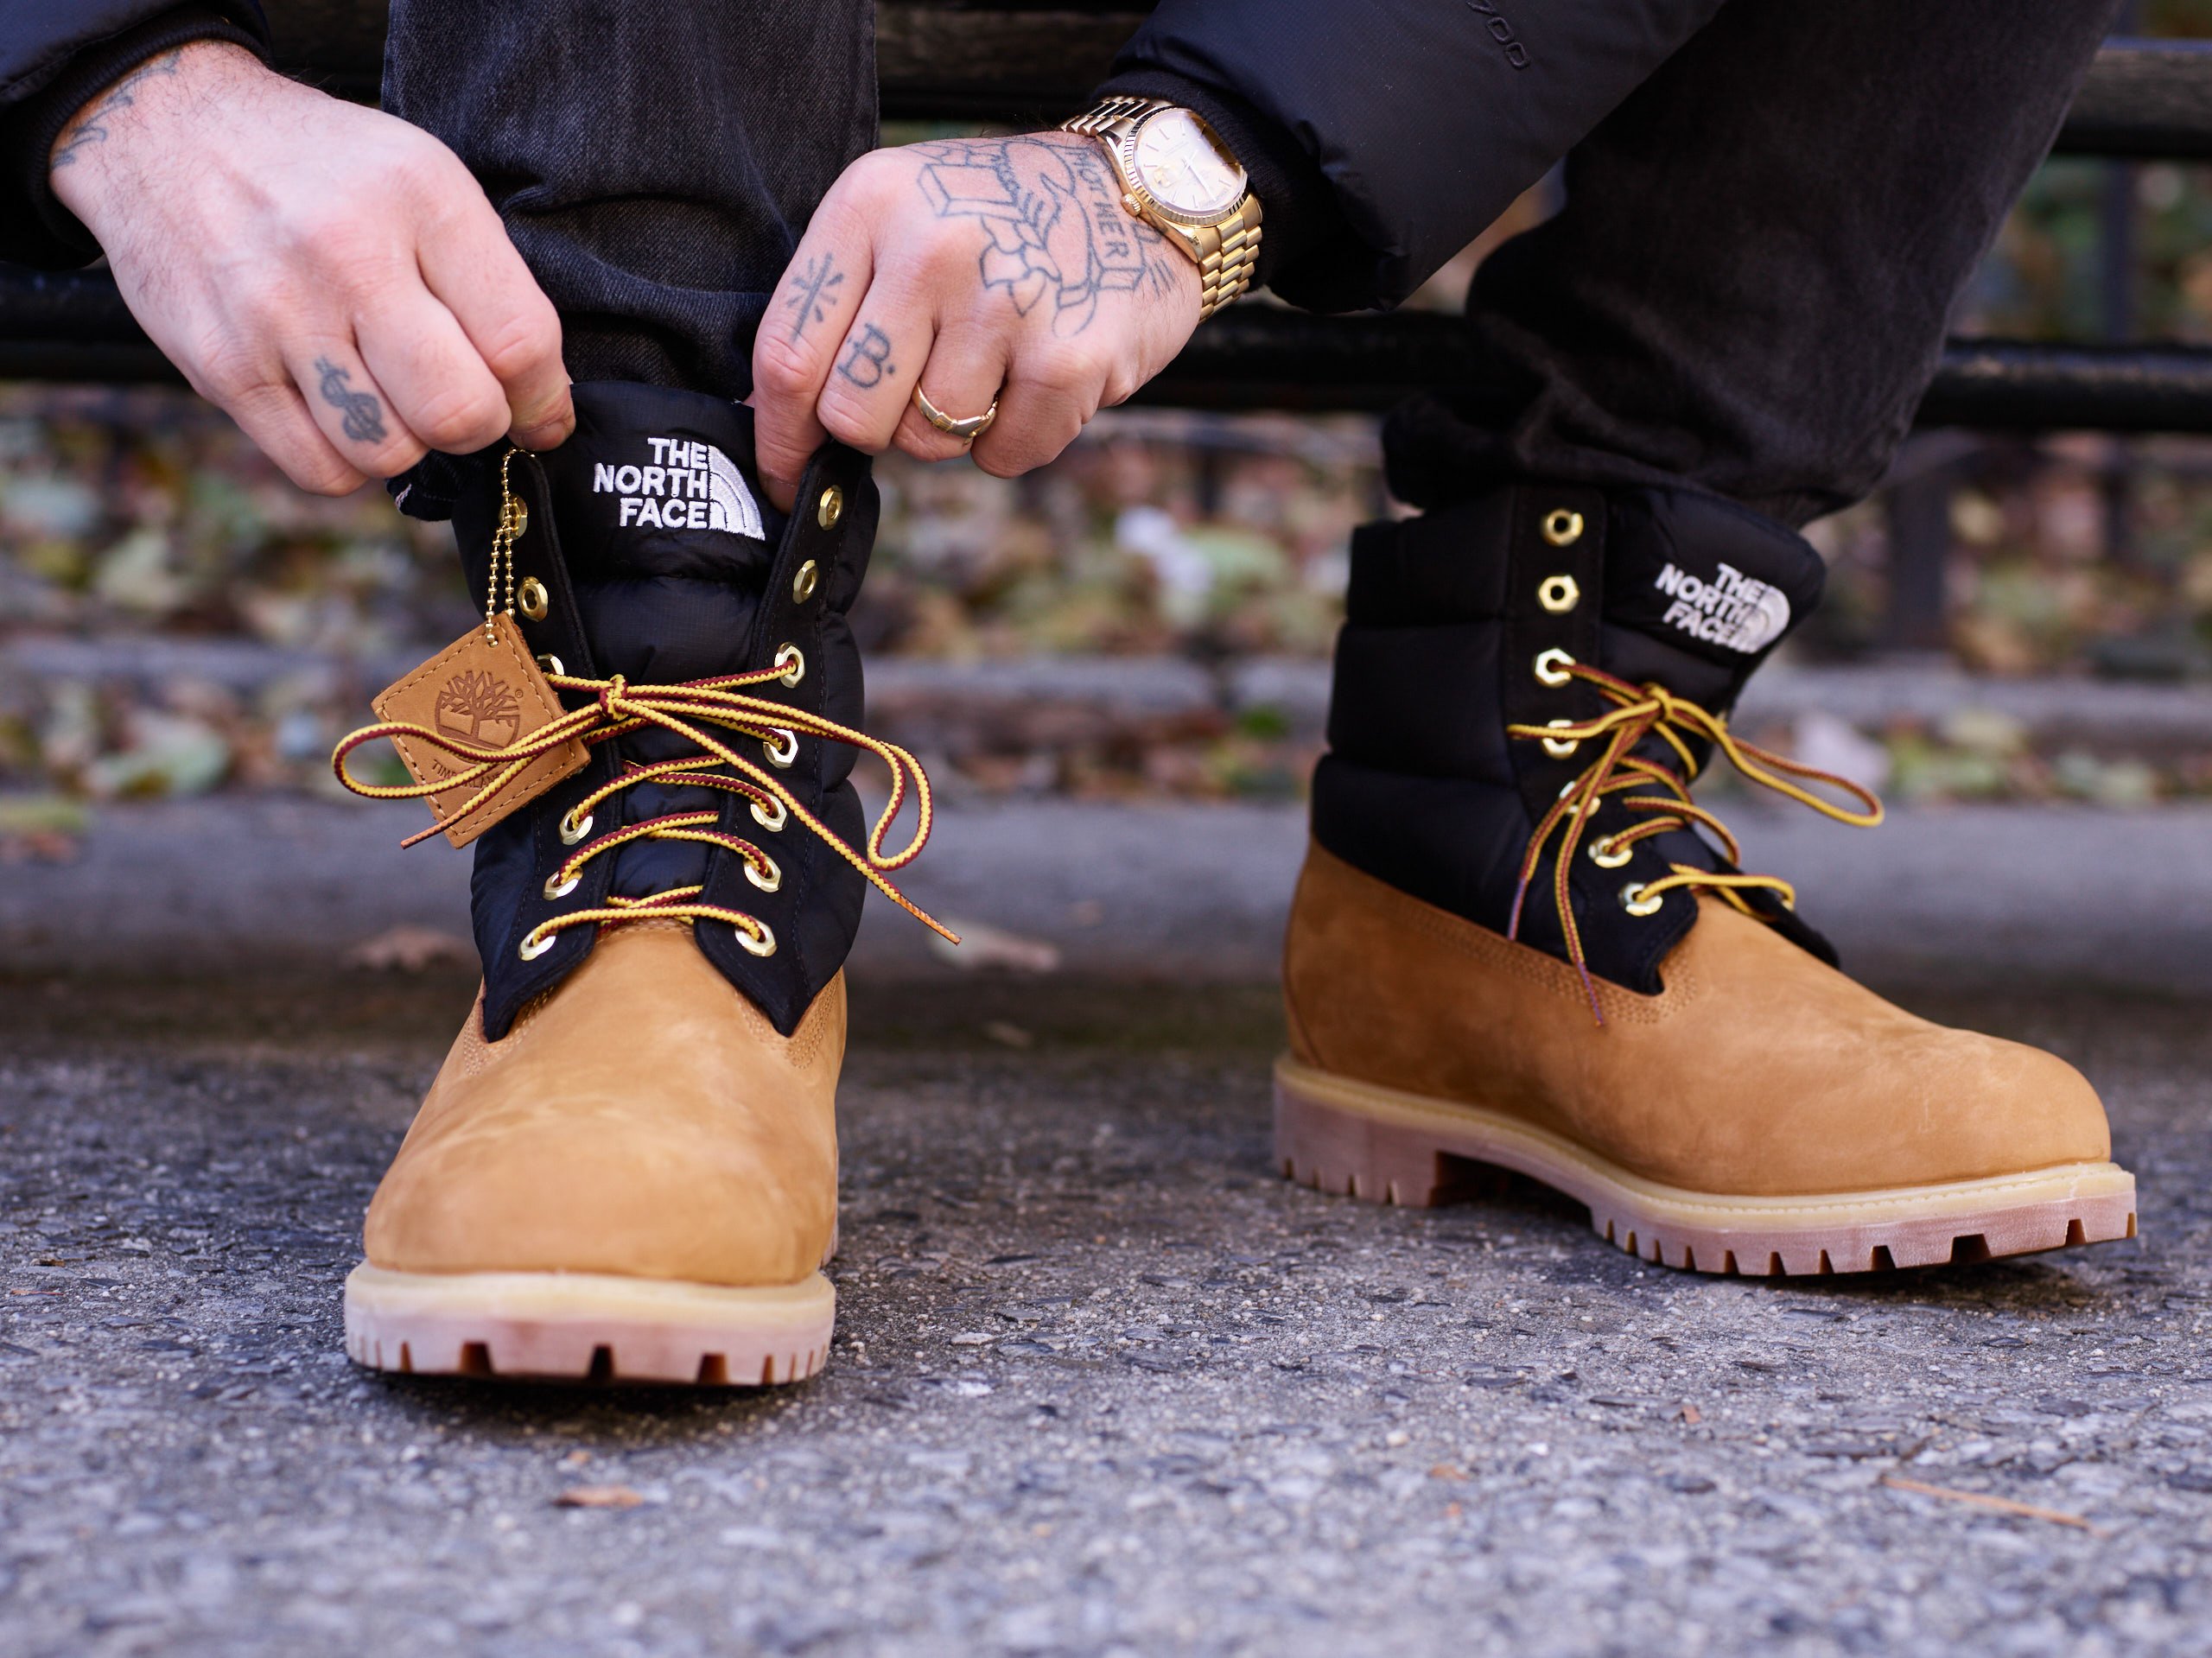 Rendezvous Senator evenwichtig Footpatrol London on Twitter: "The North Face x Timberland '6-Inch' Premium  Boot. Launching online on Friday 15th December, priced at £210.  #TheNorthFace #Timberland https://t.co/qC09SWQw9h" / Twitter